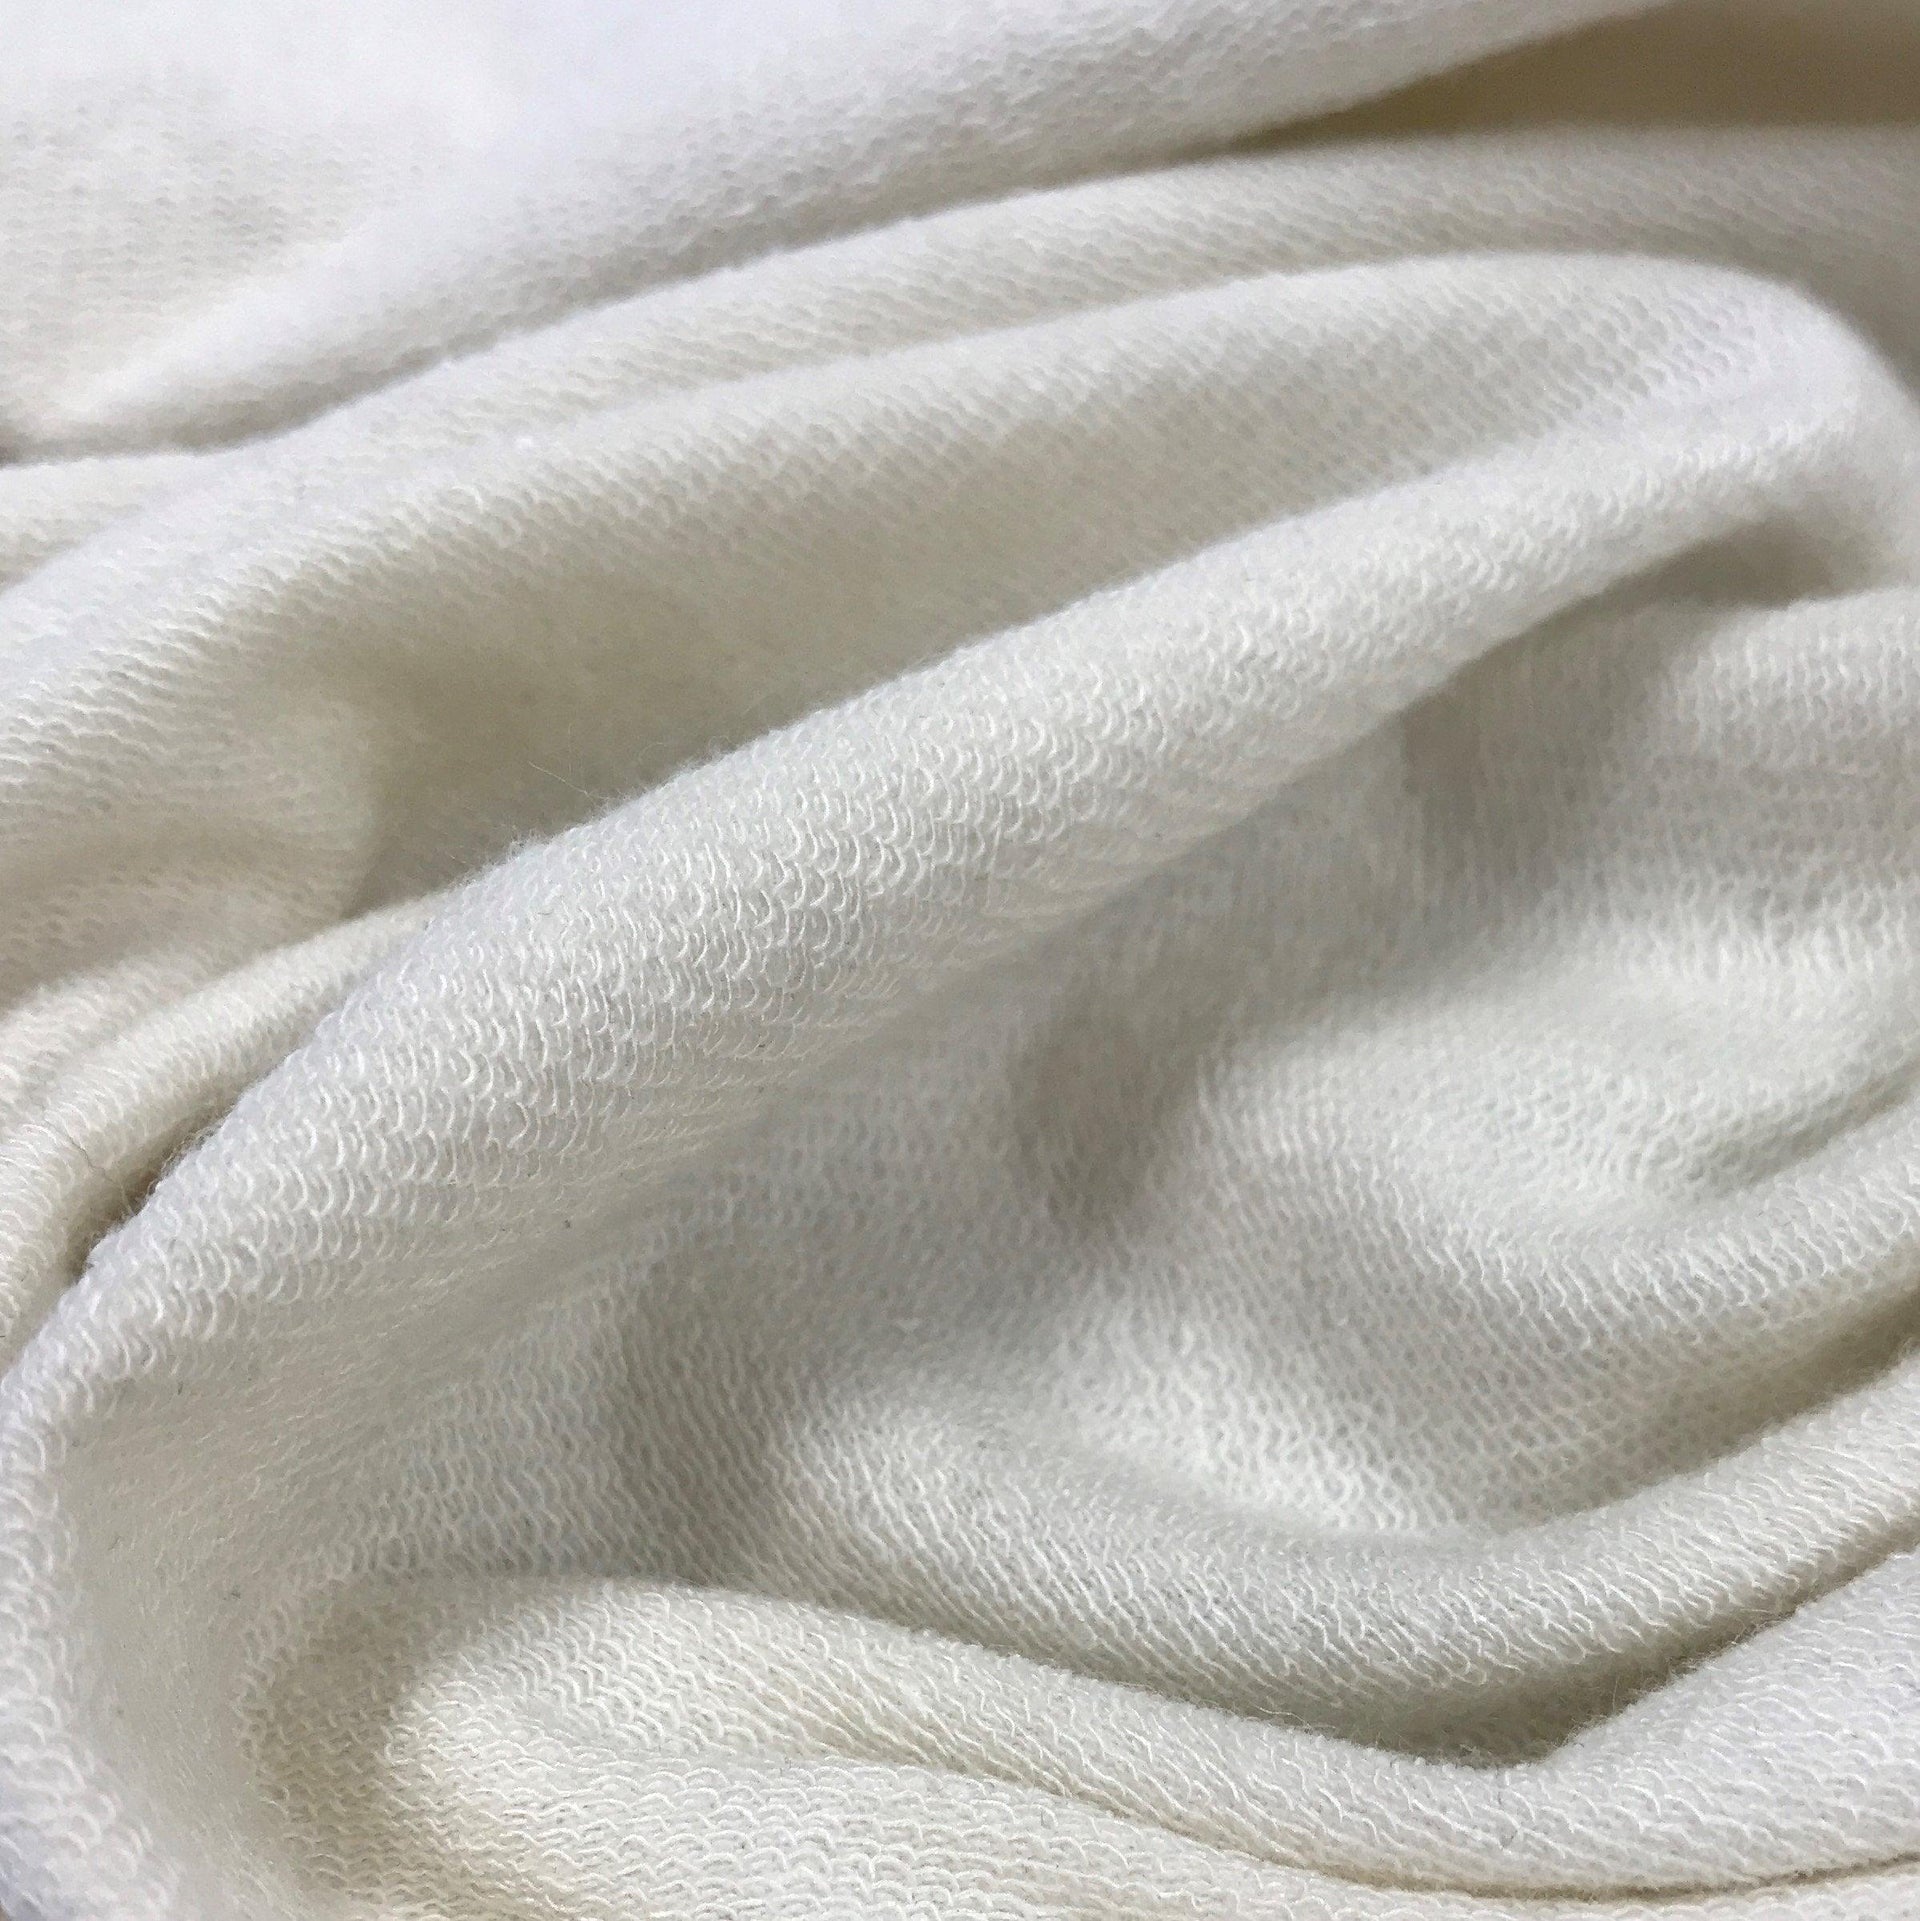 Wholesale Hemp Fabric Creme Terry Cloth Fabric by The Yard 500GSM